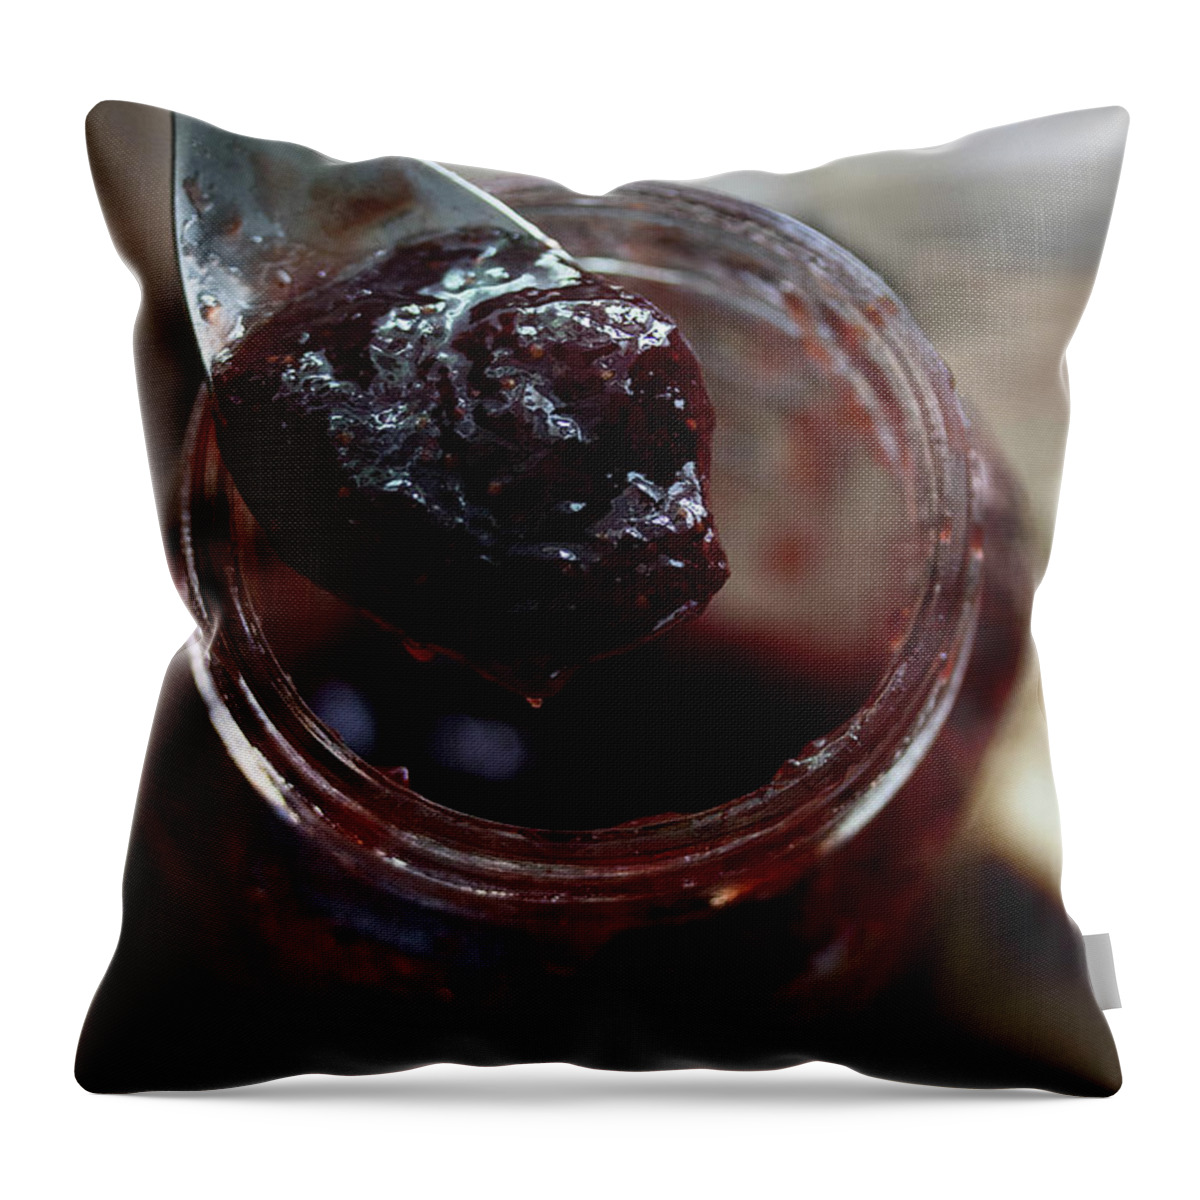 Spoon Throw Pillow featuring the photograph Strawberry Jam by Gabriela Tulian